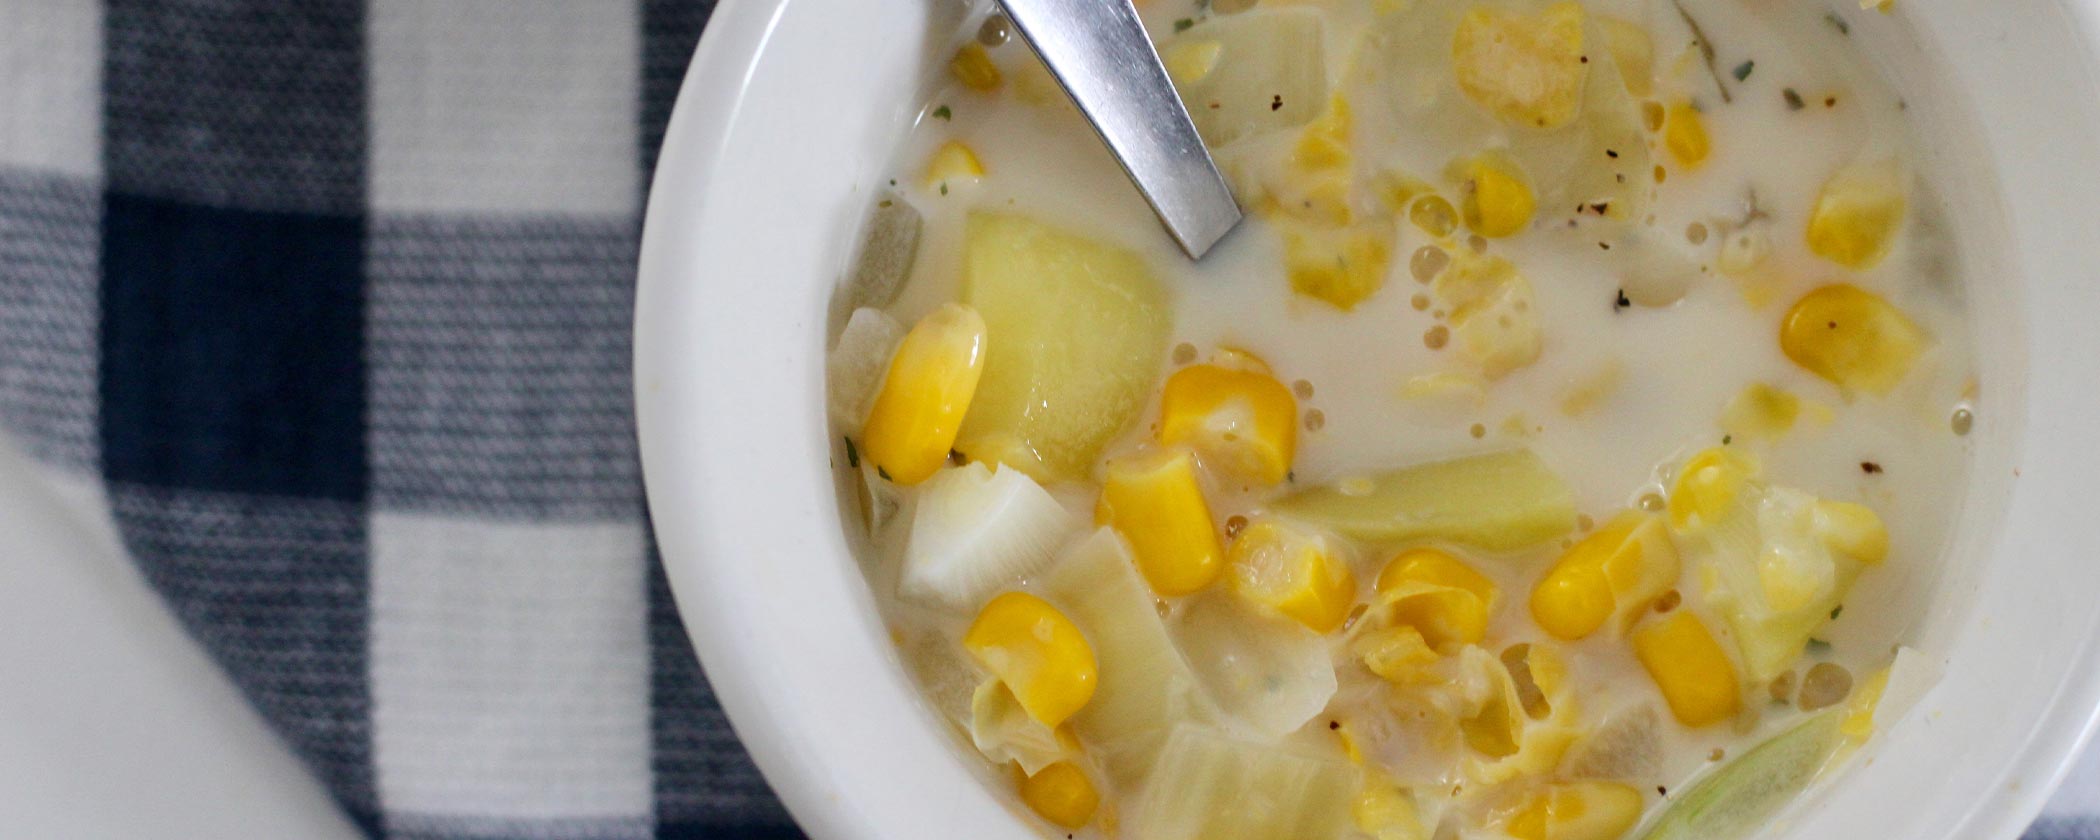 featured image for Mainely Dish Recipe Video: Corn Chowder